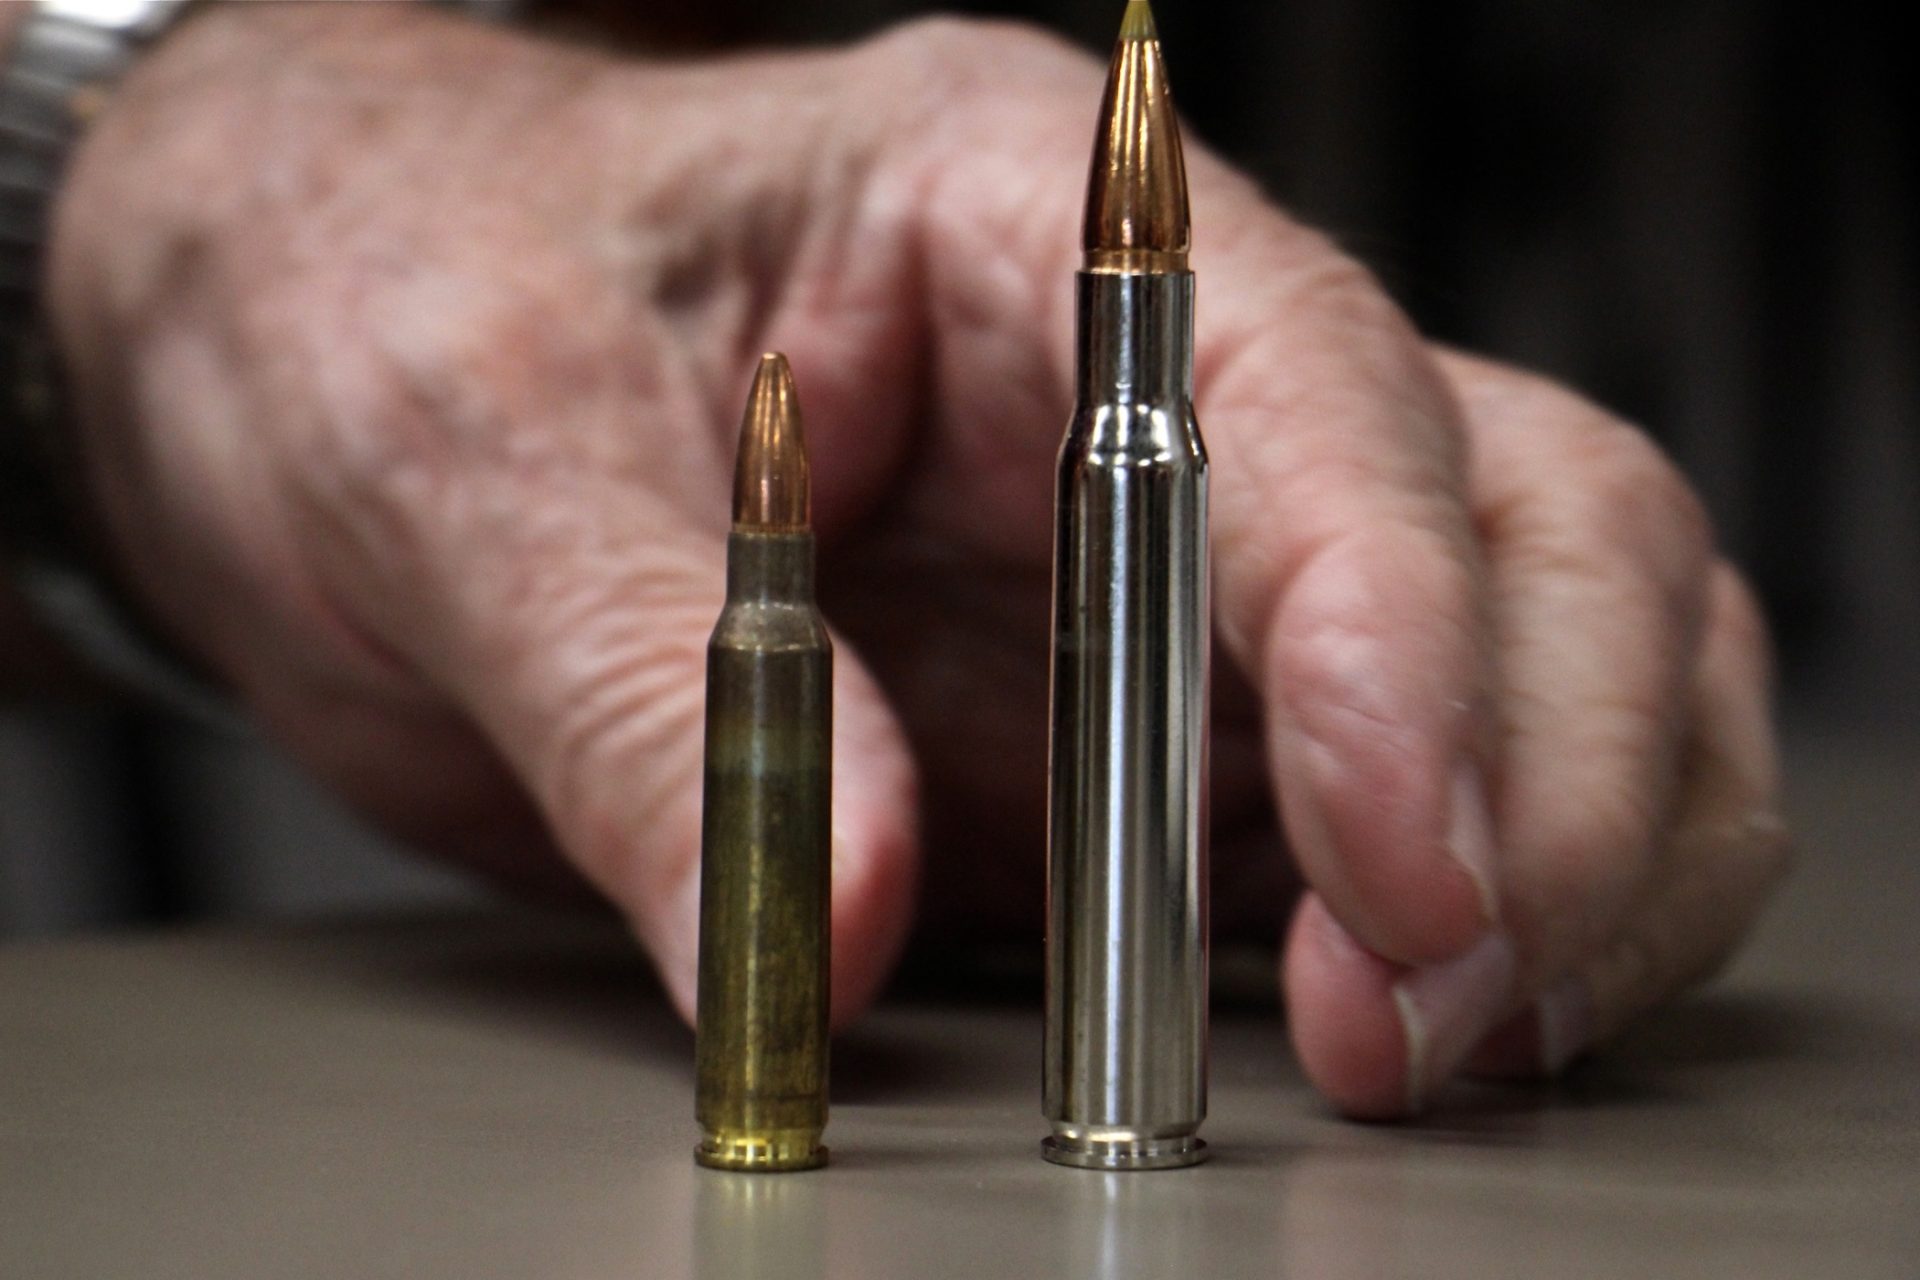 Bob Viden compares the bullets used in the AR 15 (left) and the Remmington hunting rifle. The latter, he says, is more powerful and accurate, while the former is considered too weak to be used for deer hunting.